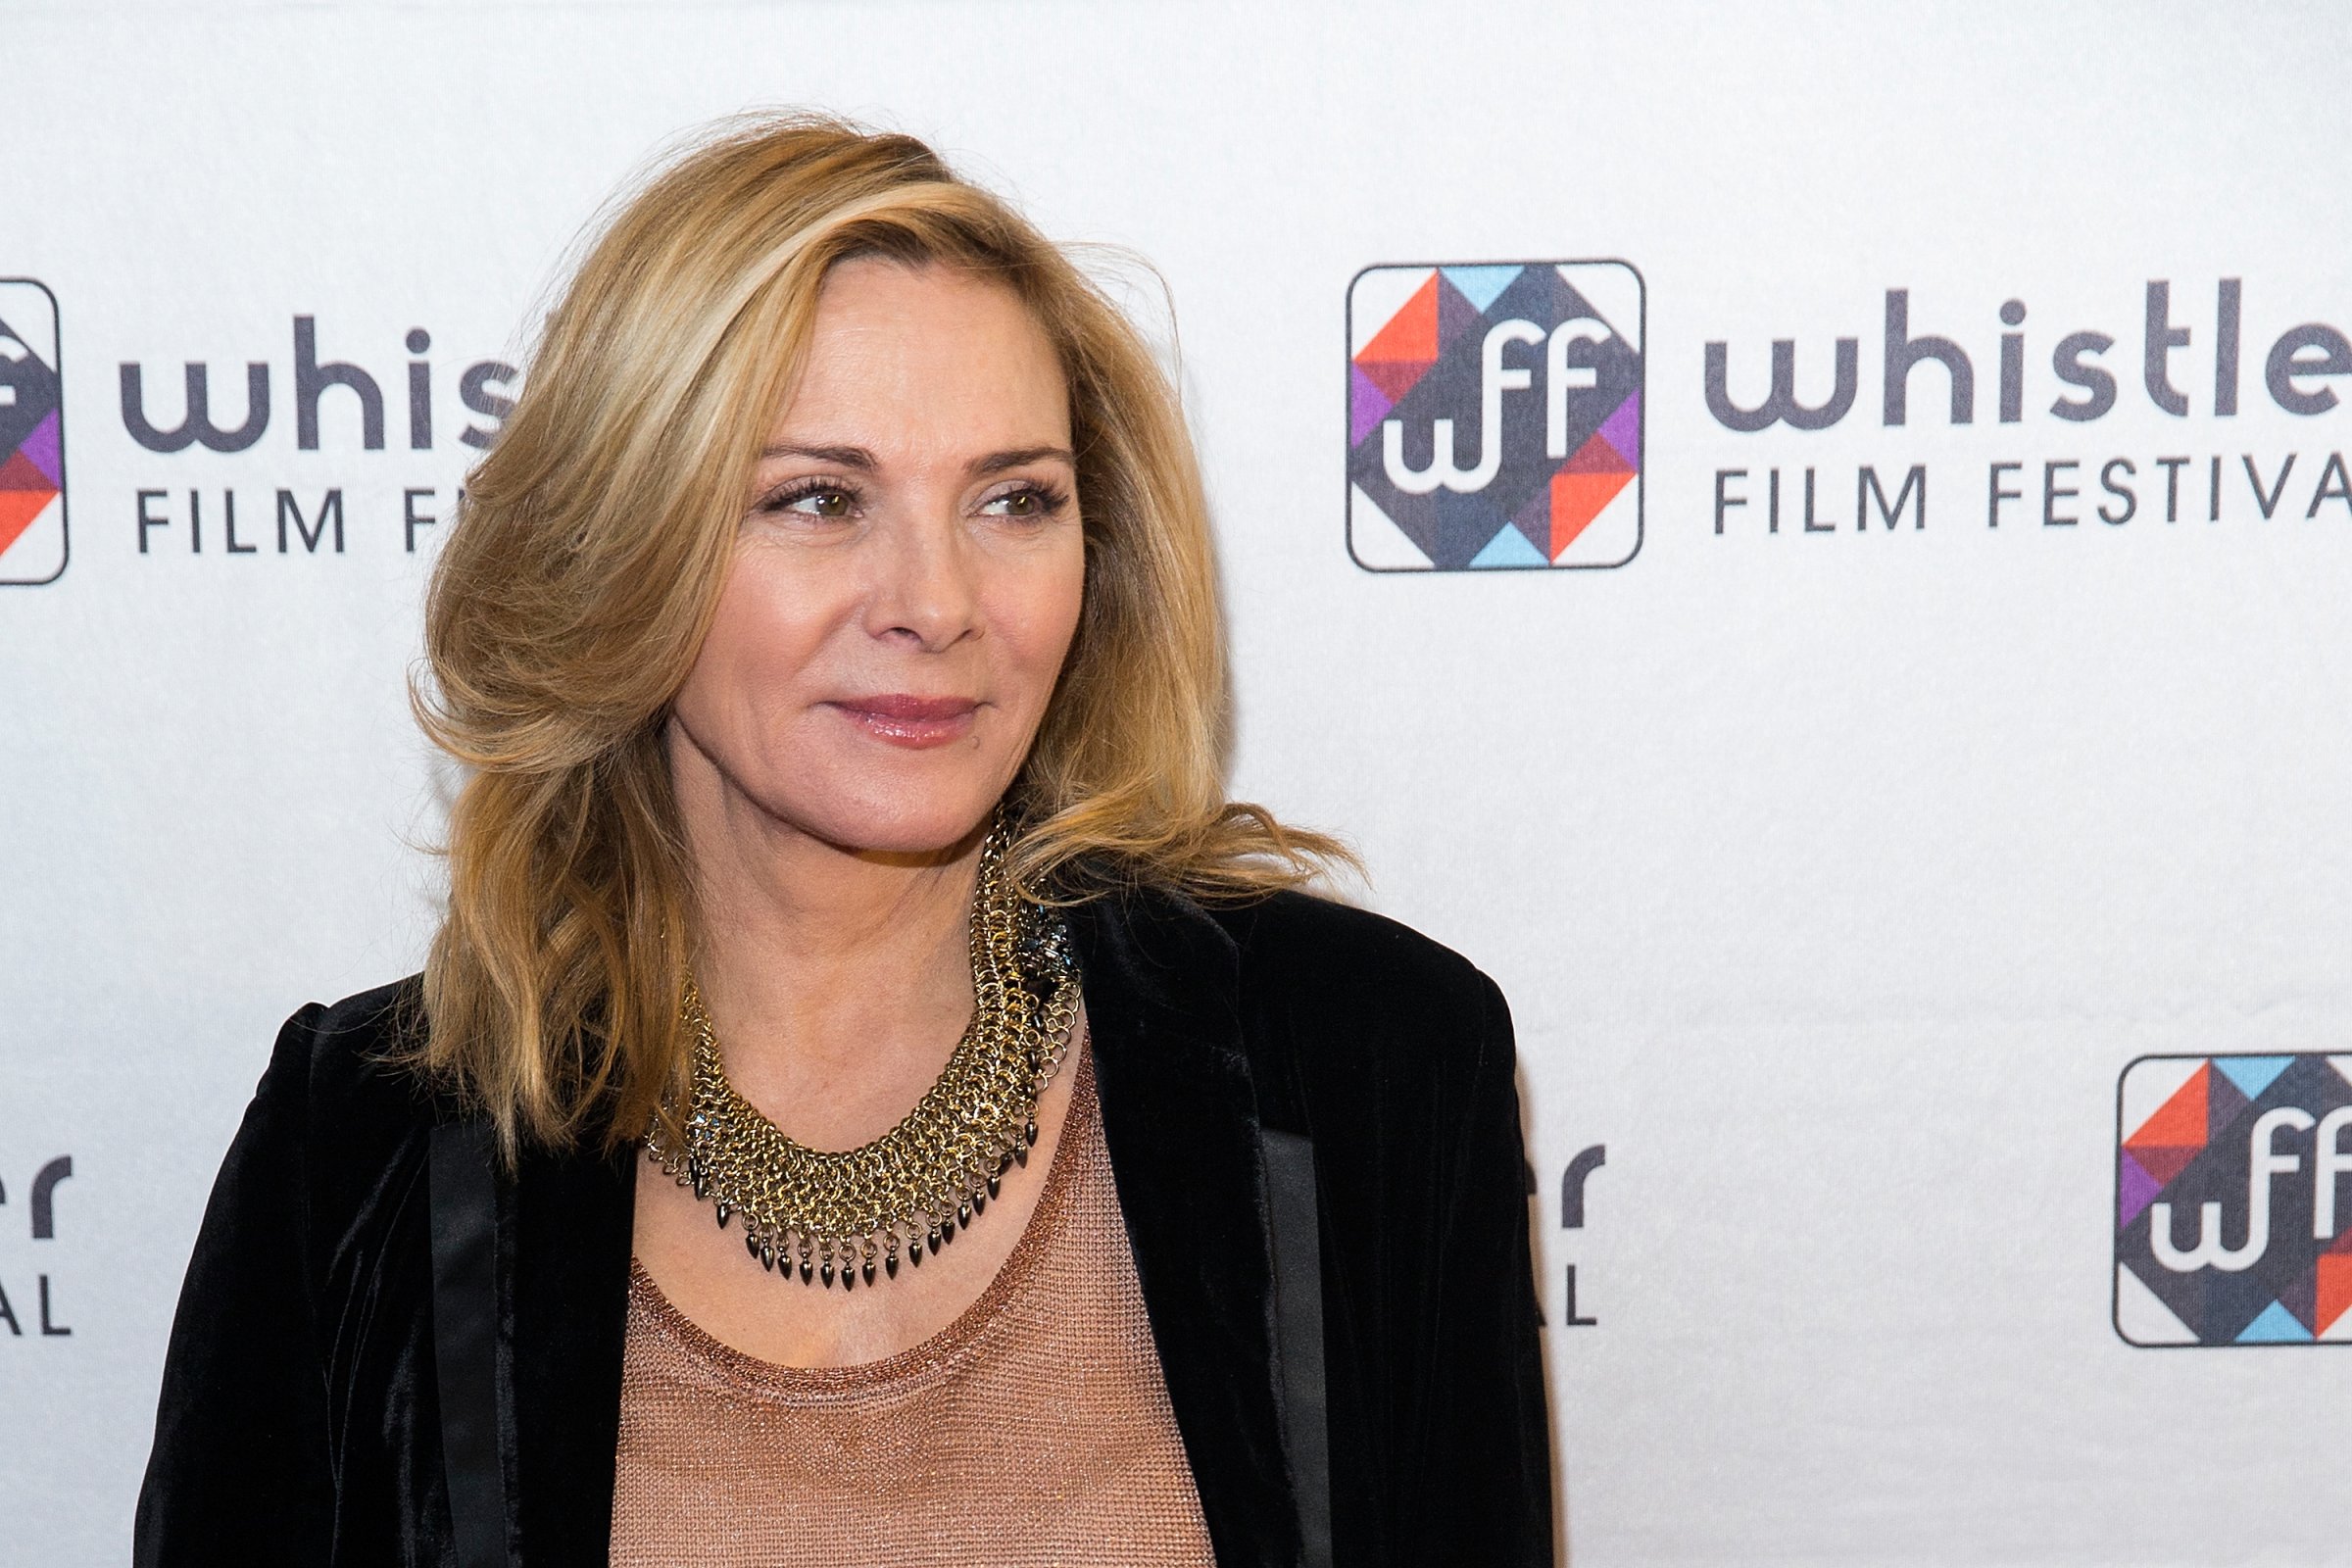 Actress Kim Cattrall attends the 'Signature Series: Tribute To Kim Cattrall' at Whistler Conference Centre at Whistler Film Festiival on December 6, 2014 in Whistler, Canada.